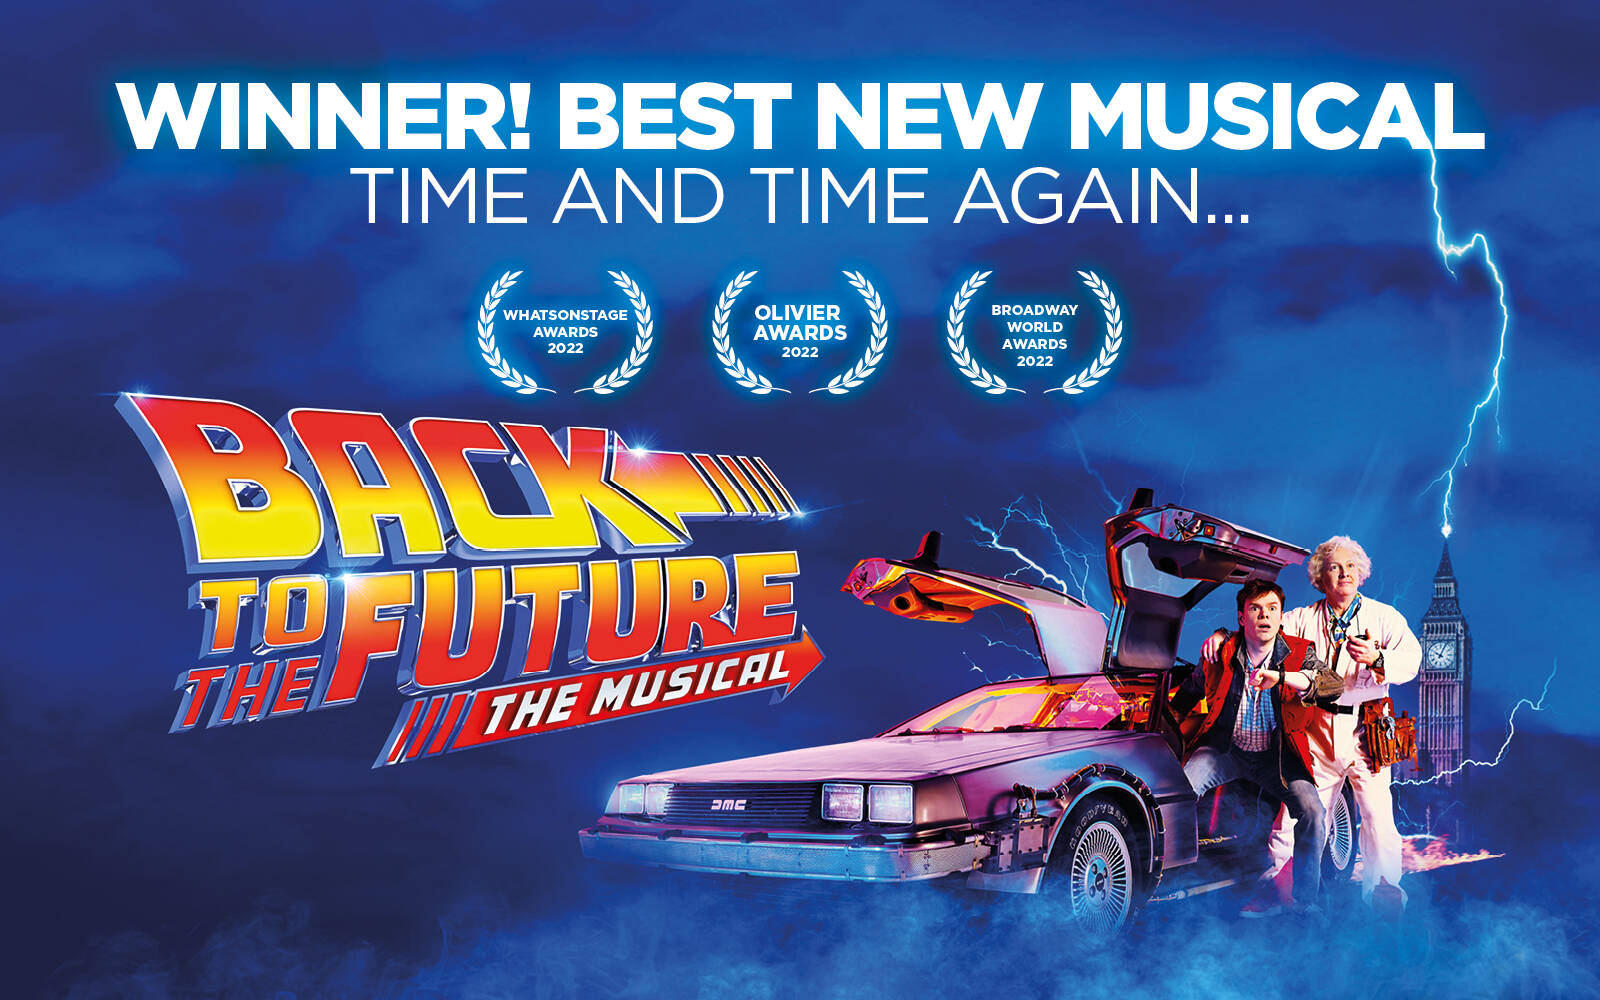 Back to the Future' Review: Broadway Musical Is Underwhelming